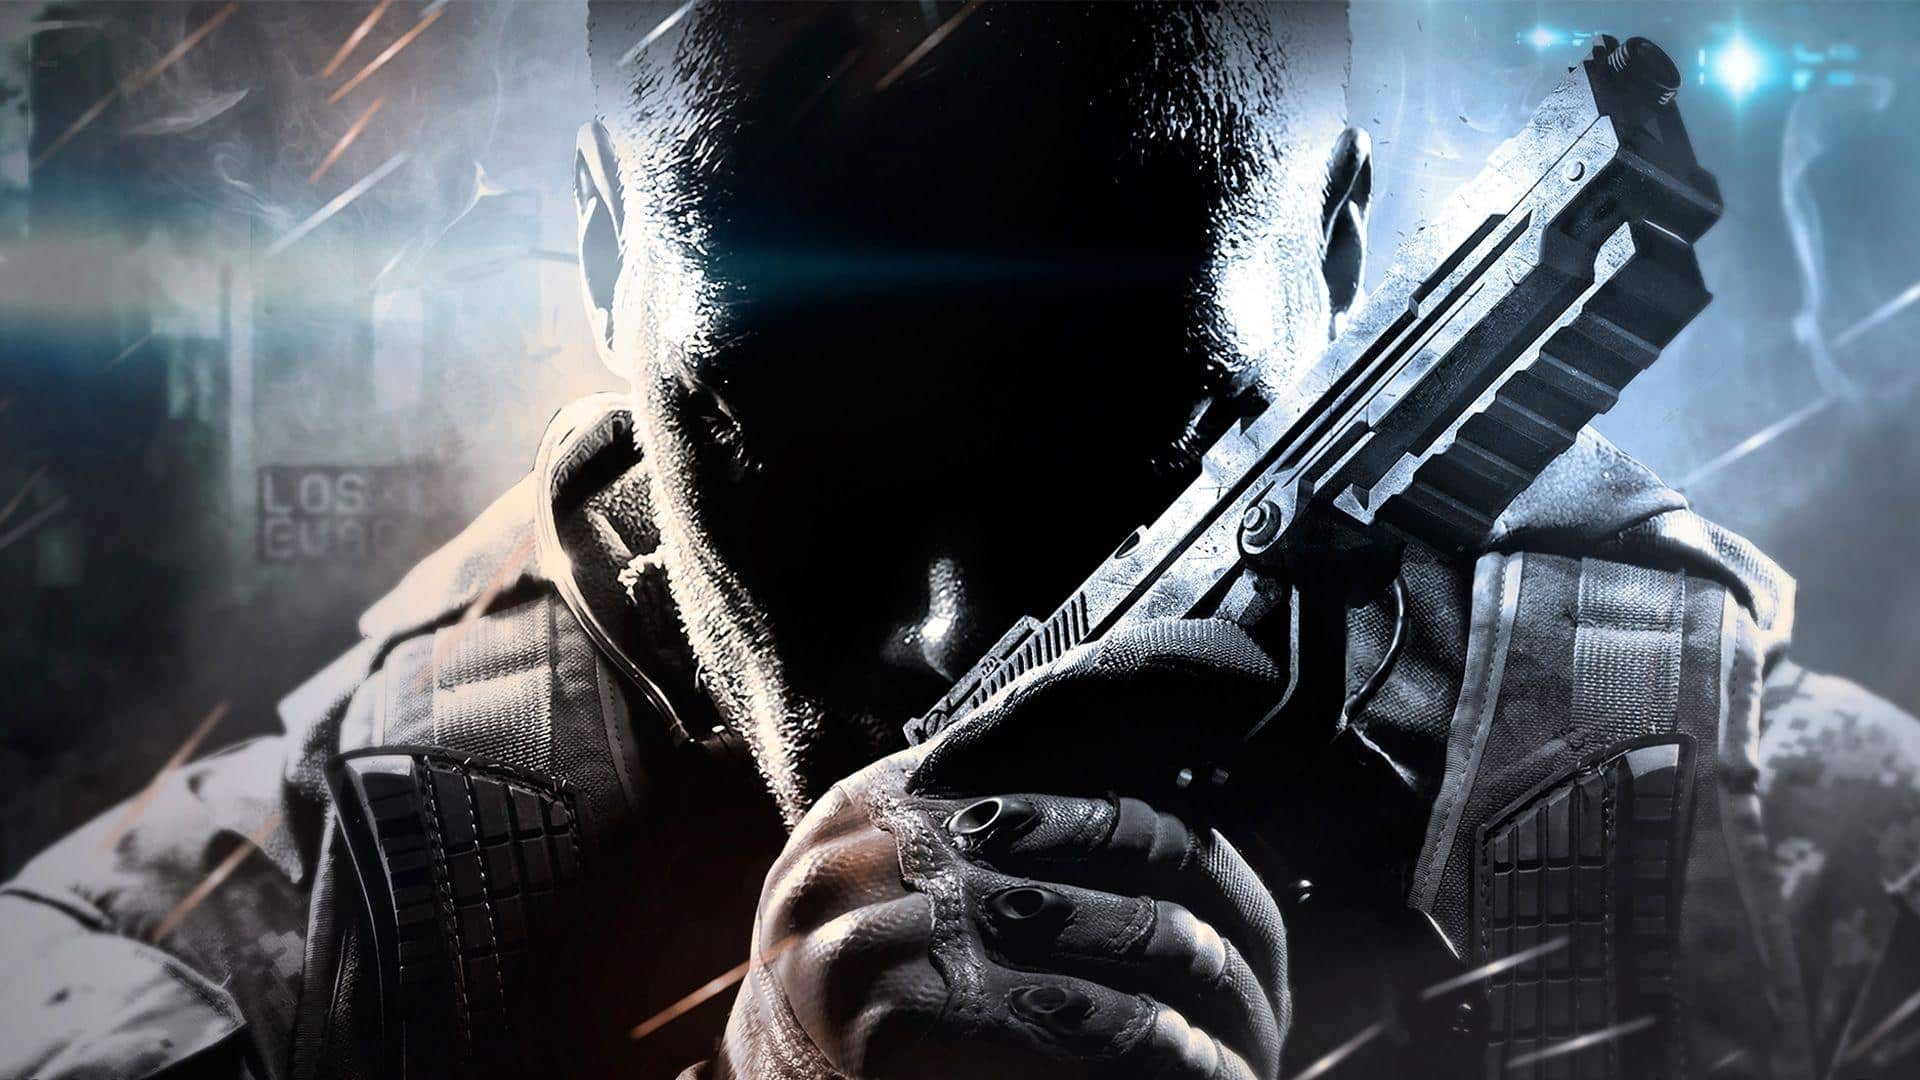 Rumor: Call of Duty Advanced Warfare Sequel Could Finally Be Happening